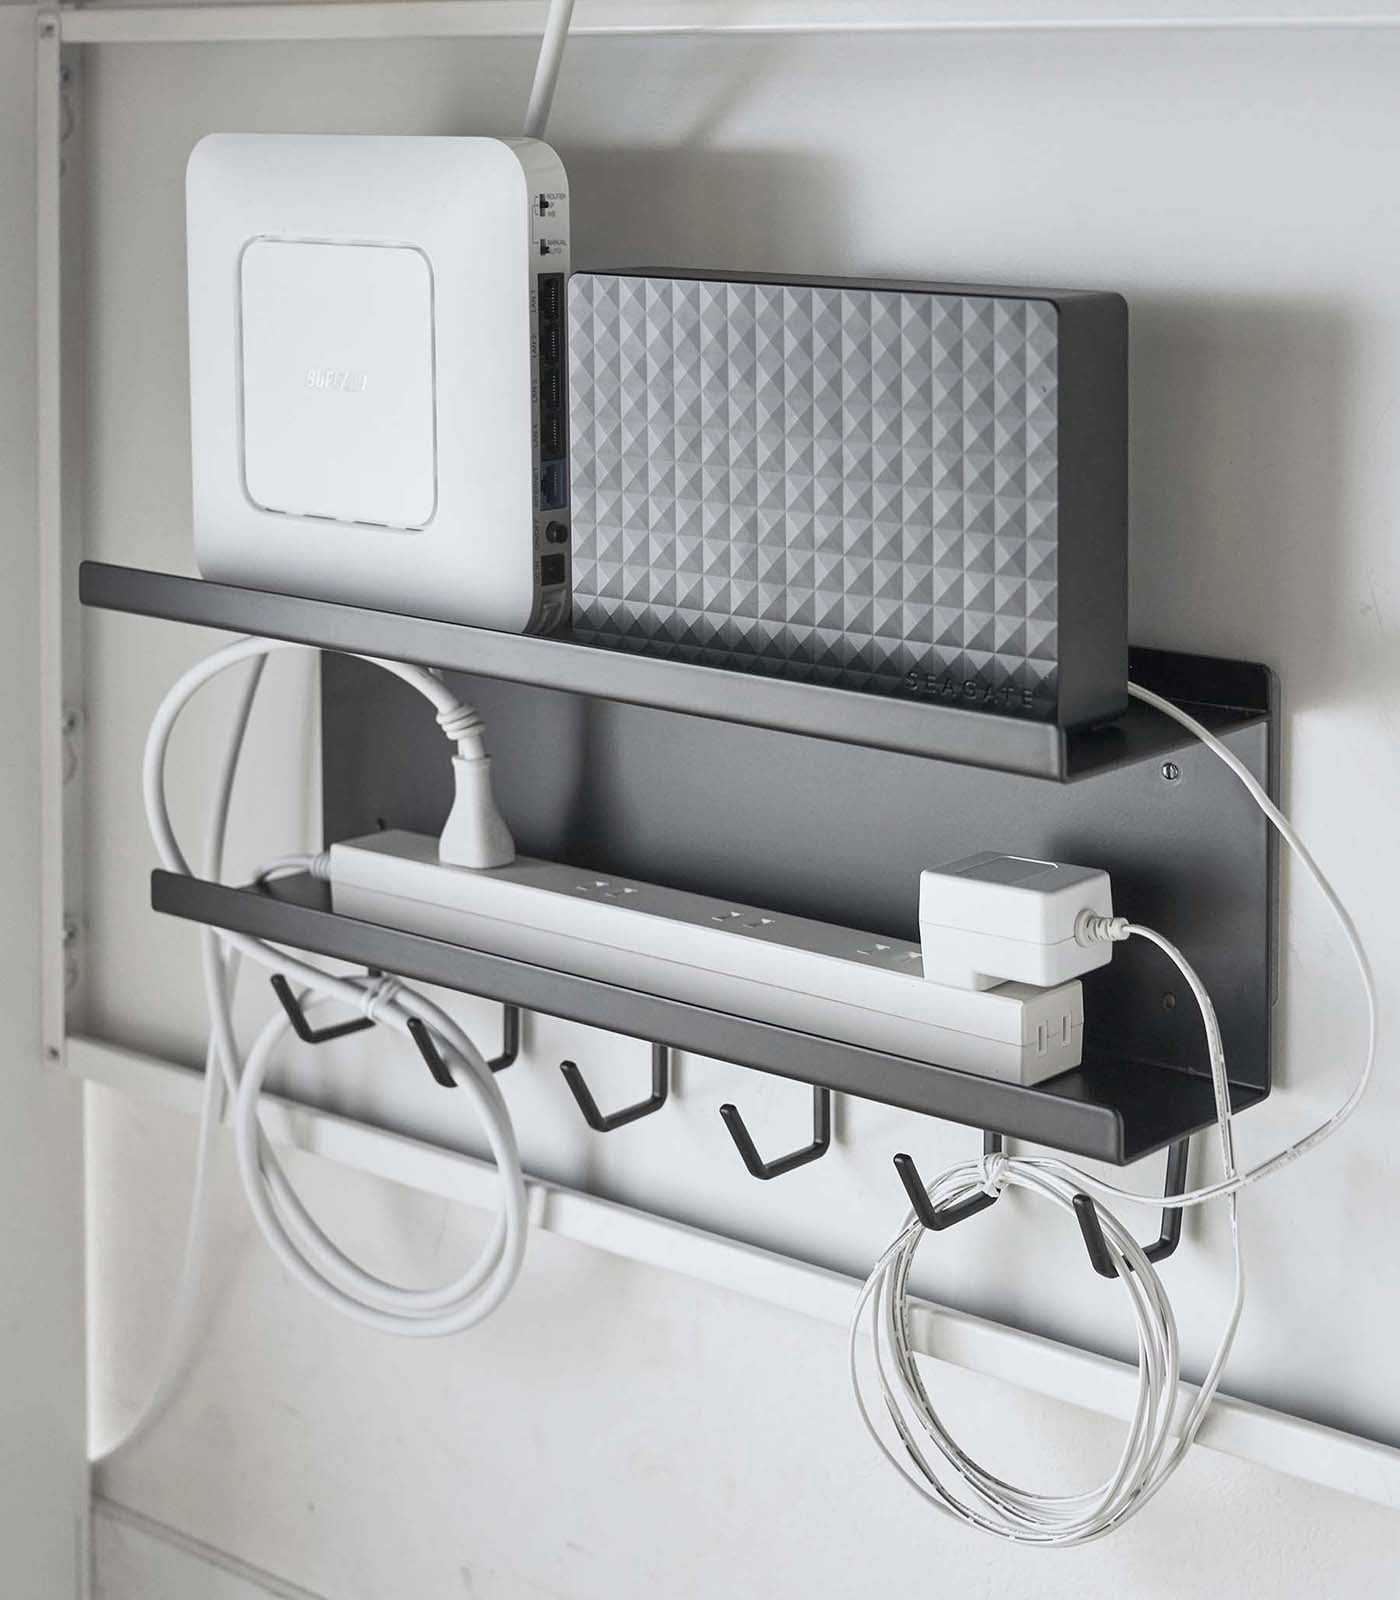 Wall-Mount Cable & Router Storage Rack - Steel